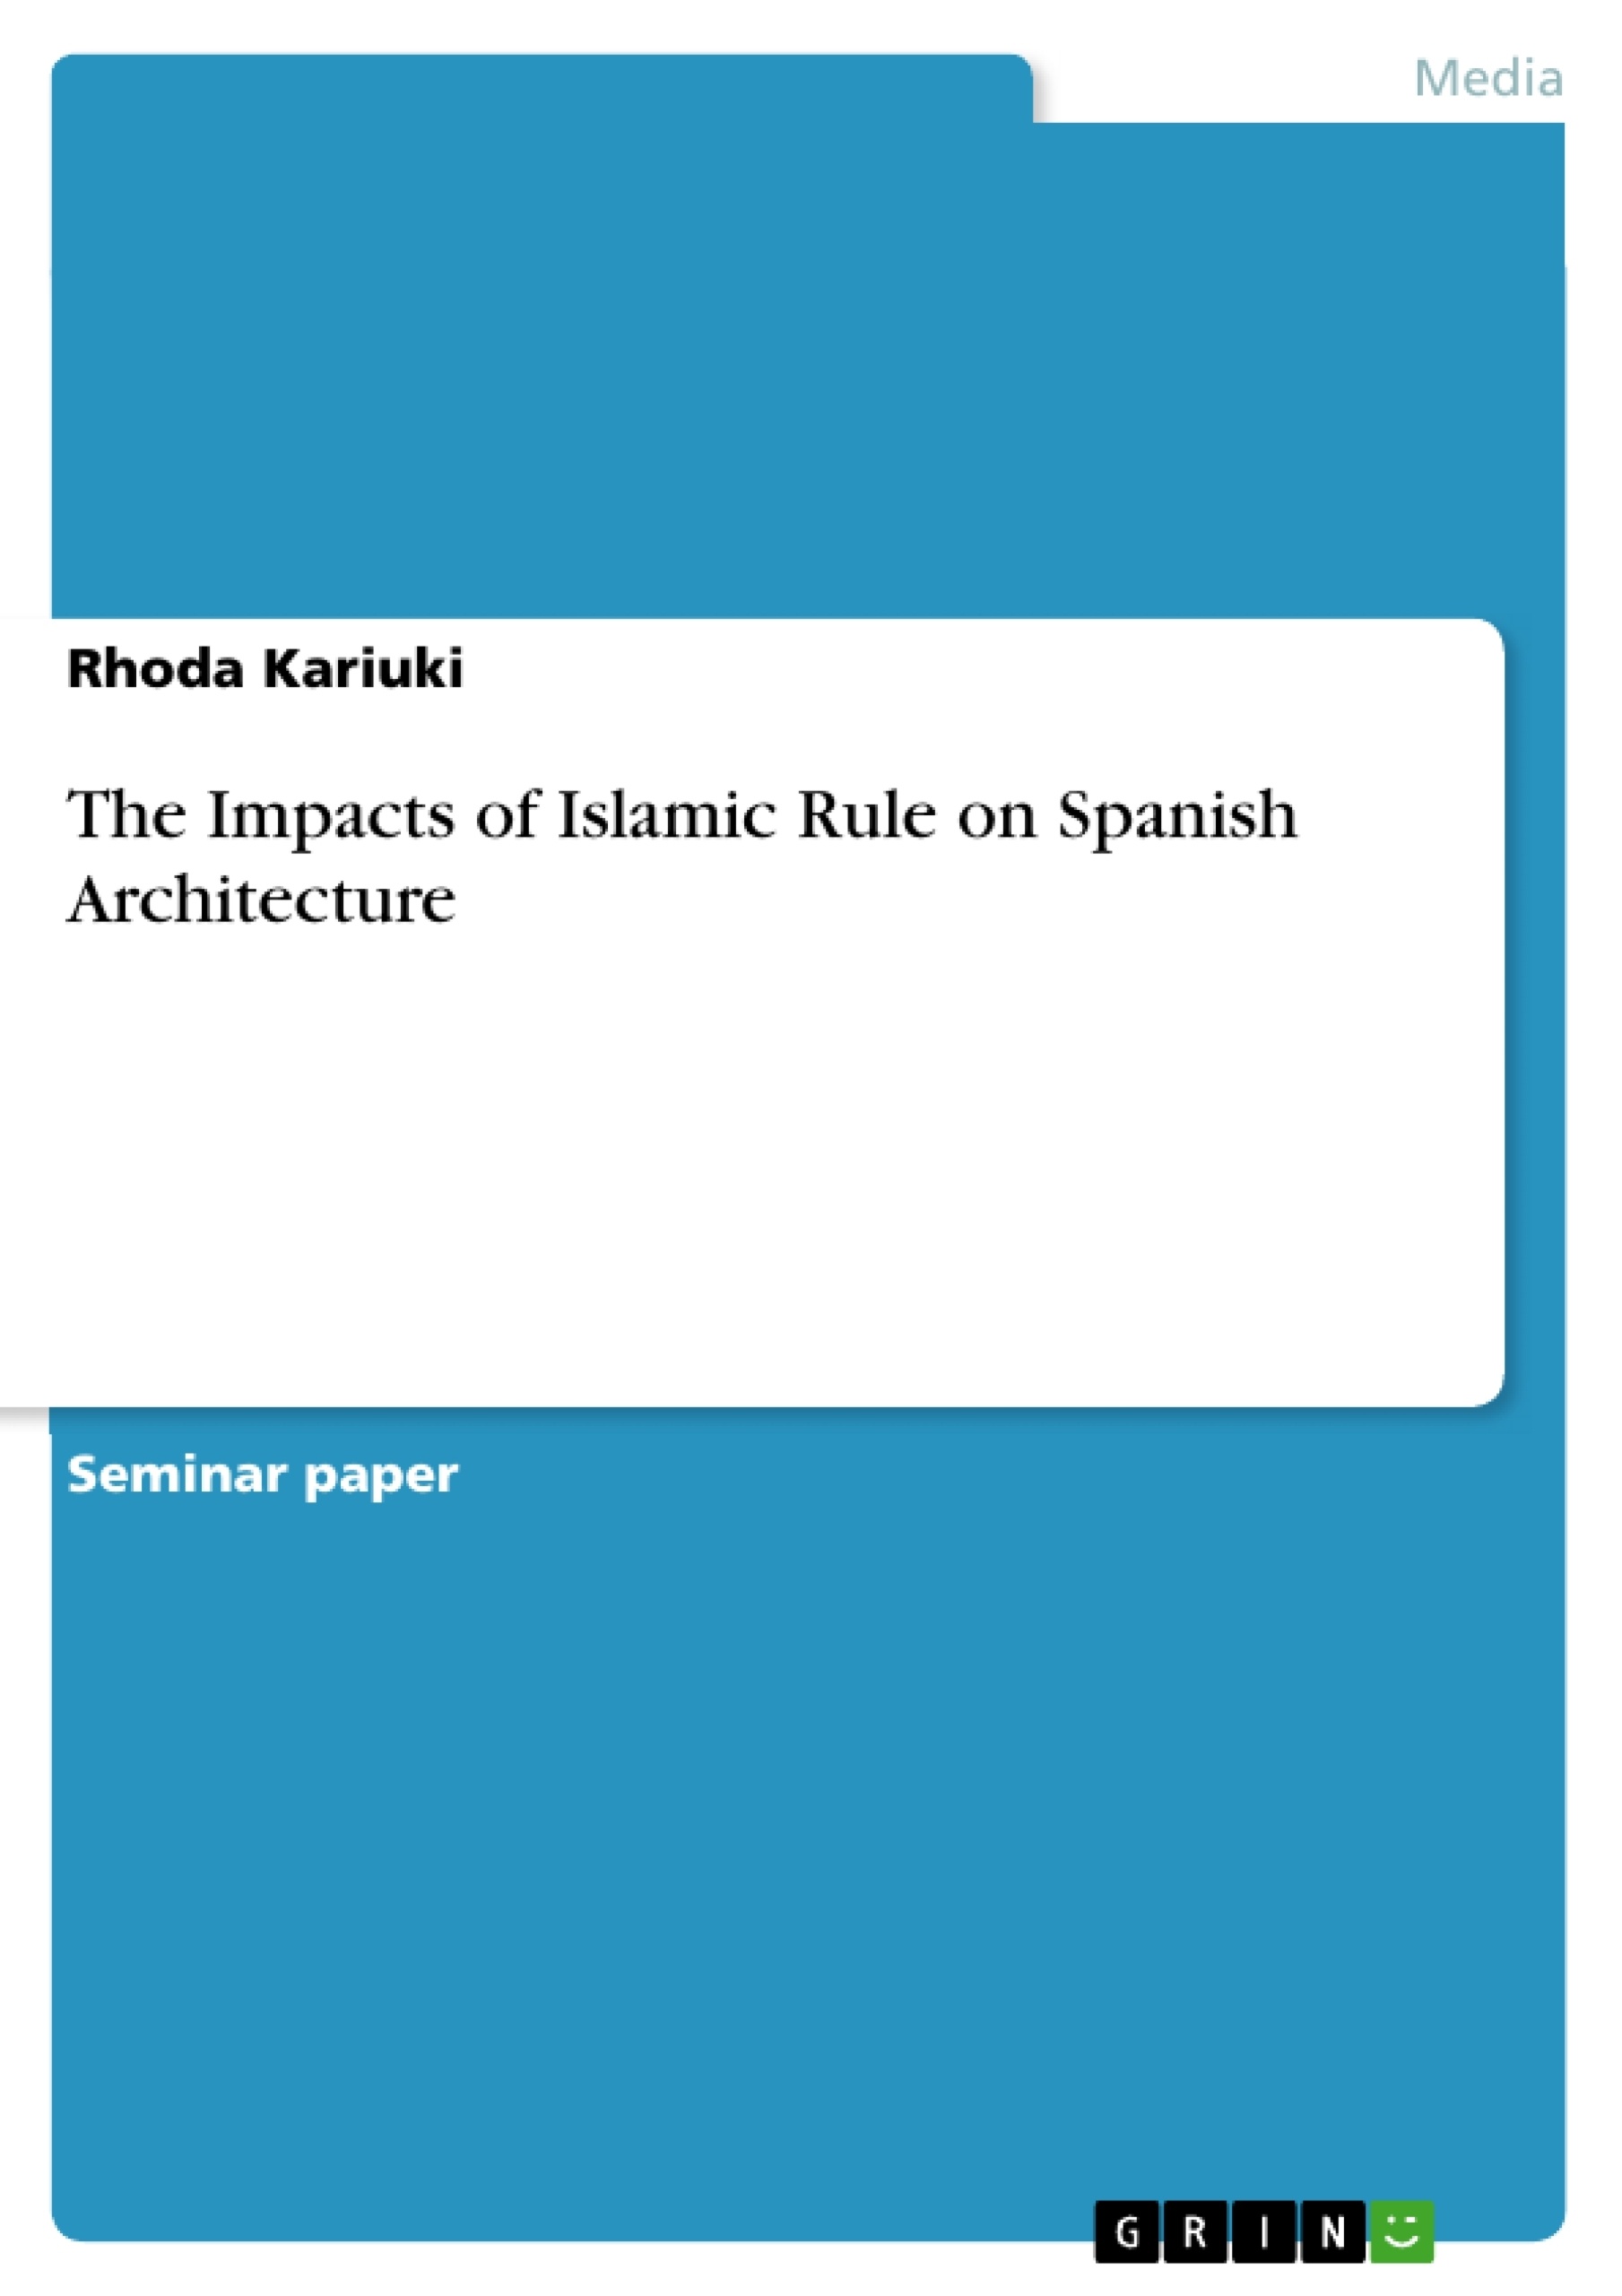 Título: The Impacts of Islamic Rule on Spanish Architecture